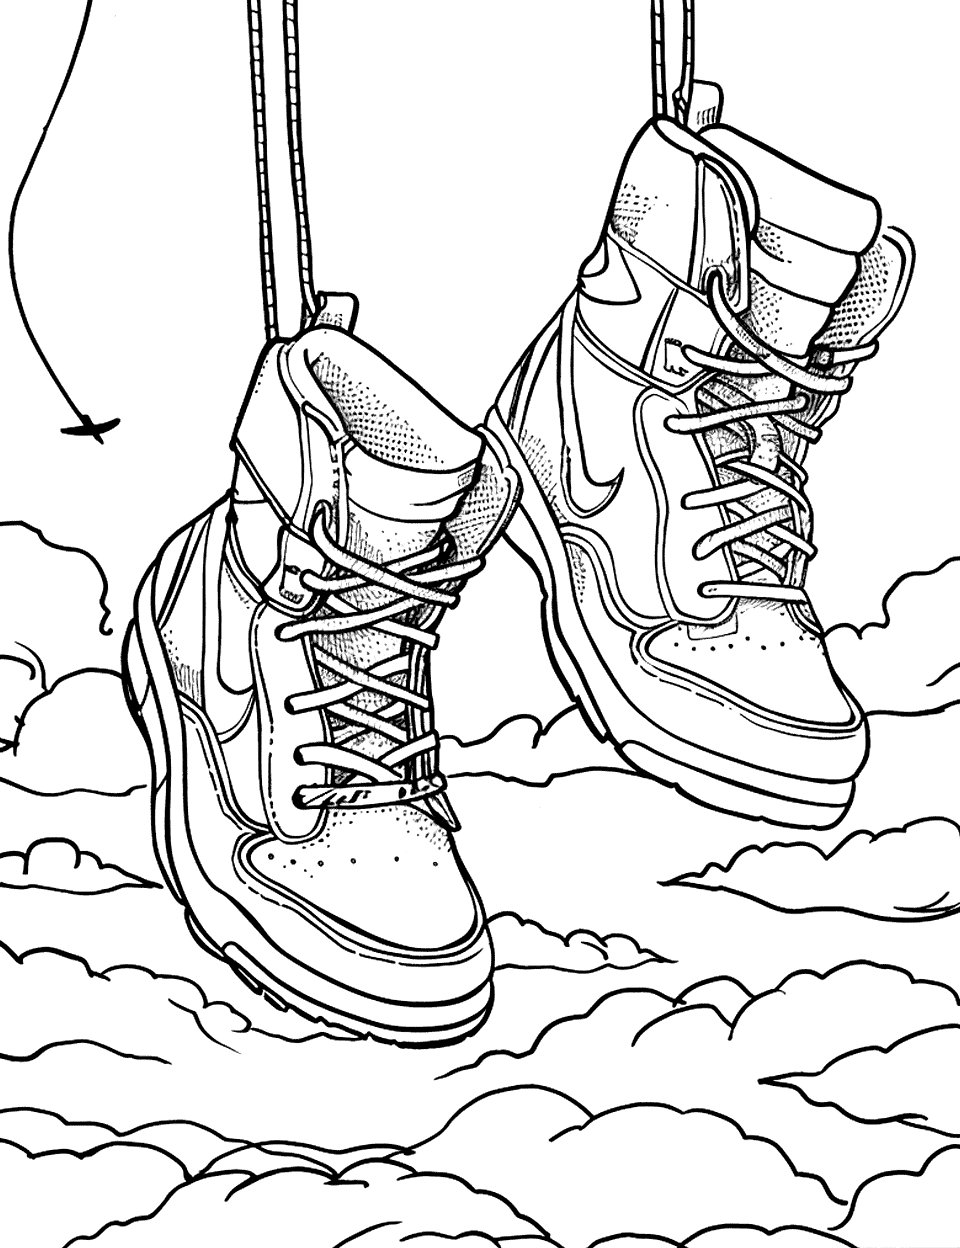 Parachute Boots in the Sky Shoe Coloring Page - Parachute boots dangling mid-air with clouds and distant birds flying around.